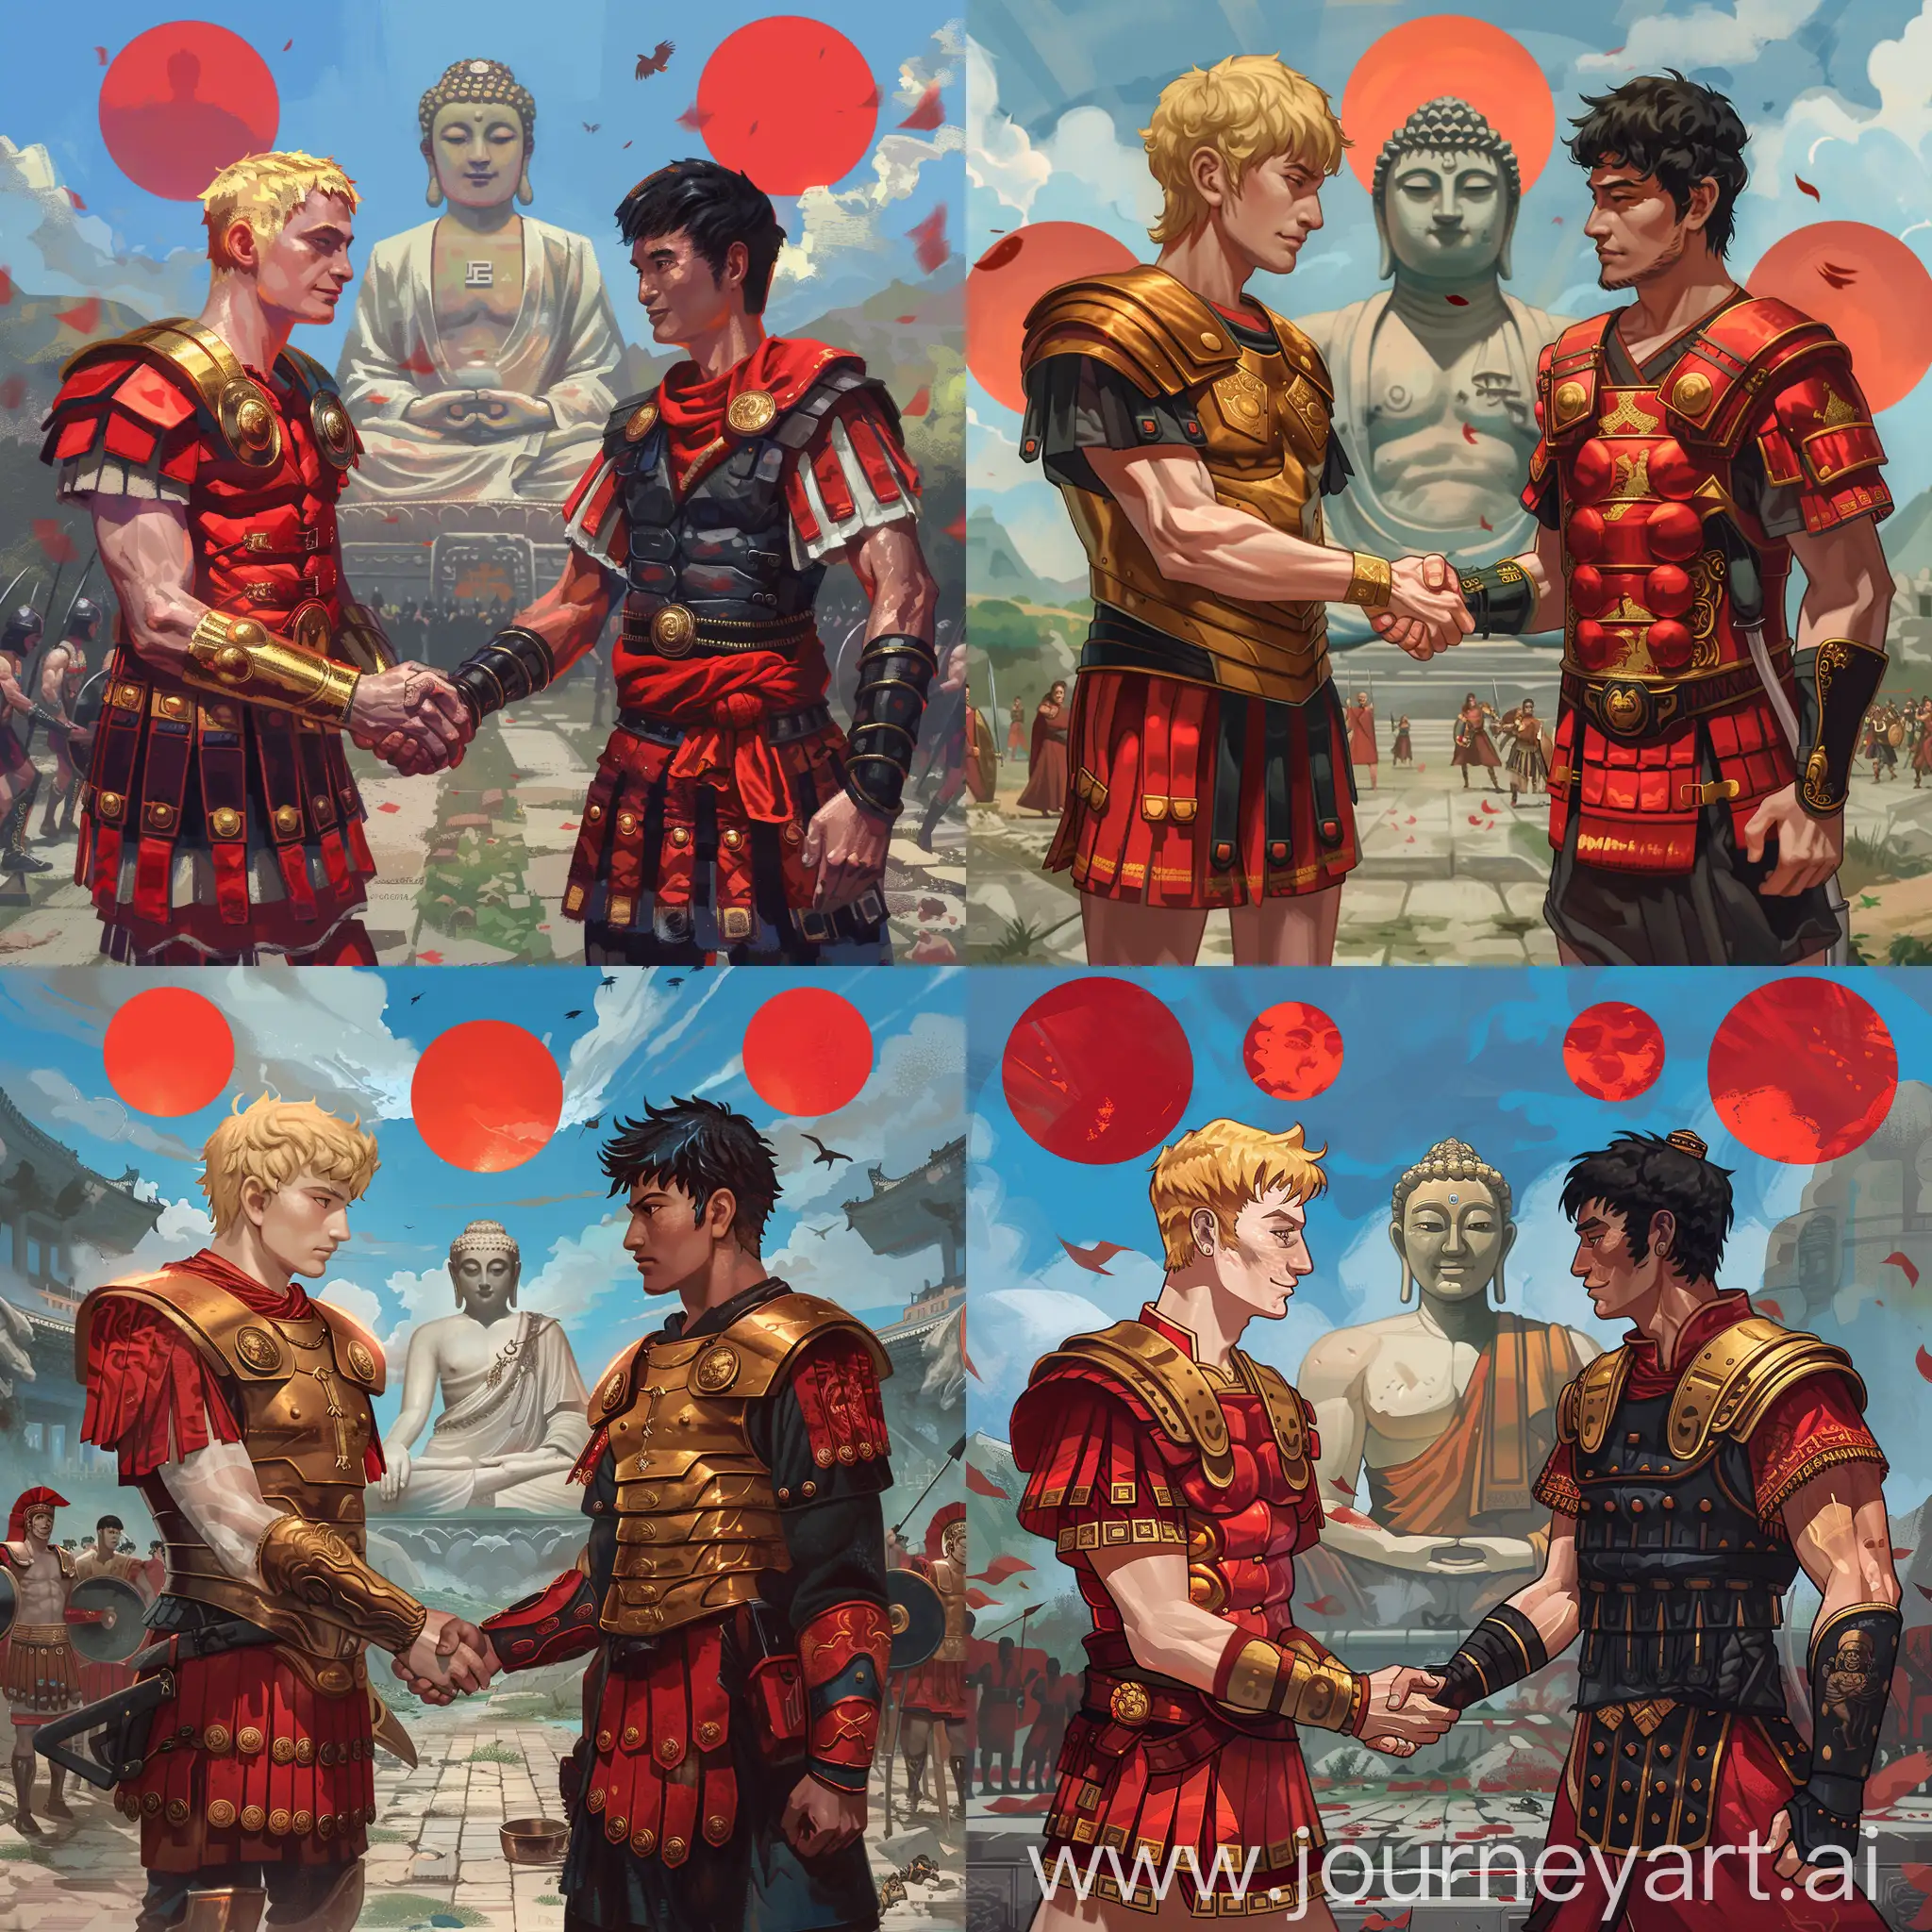 Ancient-Warriors-Alliance-Roman-General-and-Han-Warrior-in-Central-Asian-Battlefield